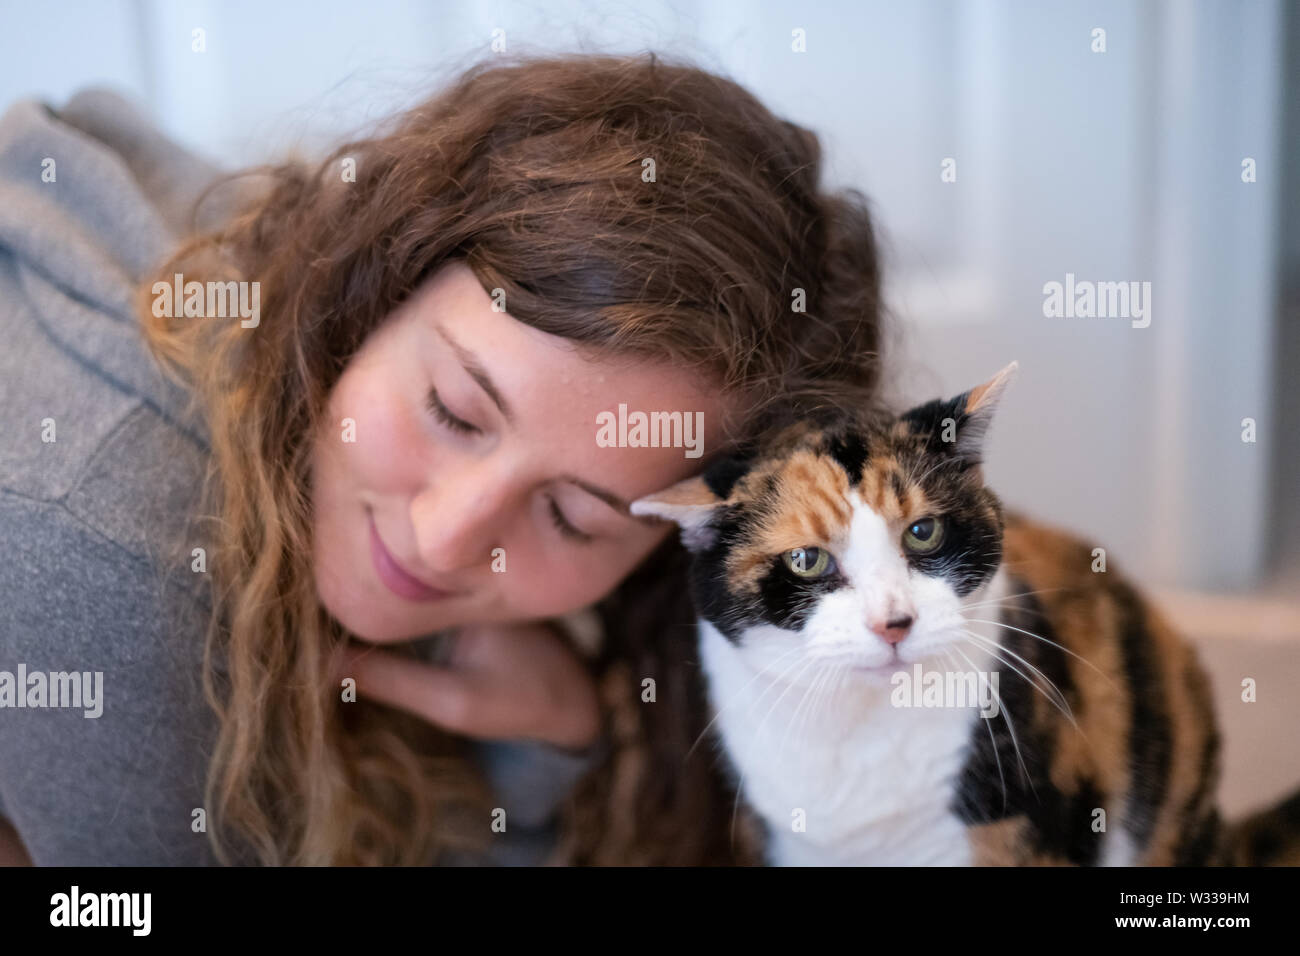 Closeup portrait of happy smiling young woman bonding with calico cat pet companion, bumping rubbing bunting heads, friends showing affection Stock Photo